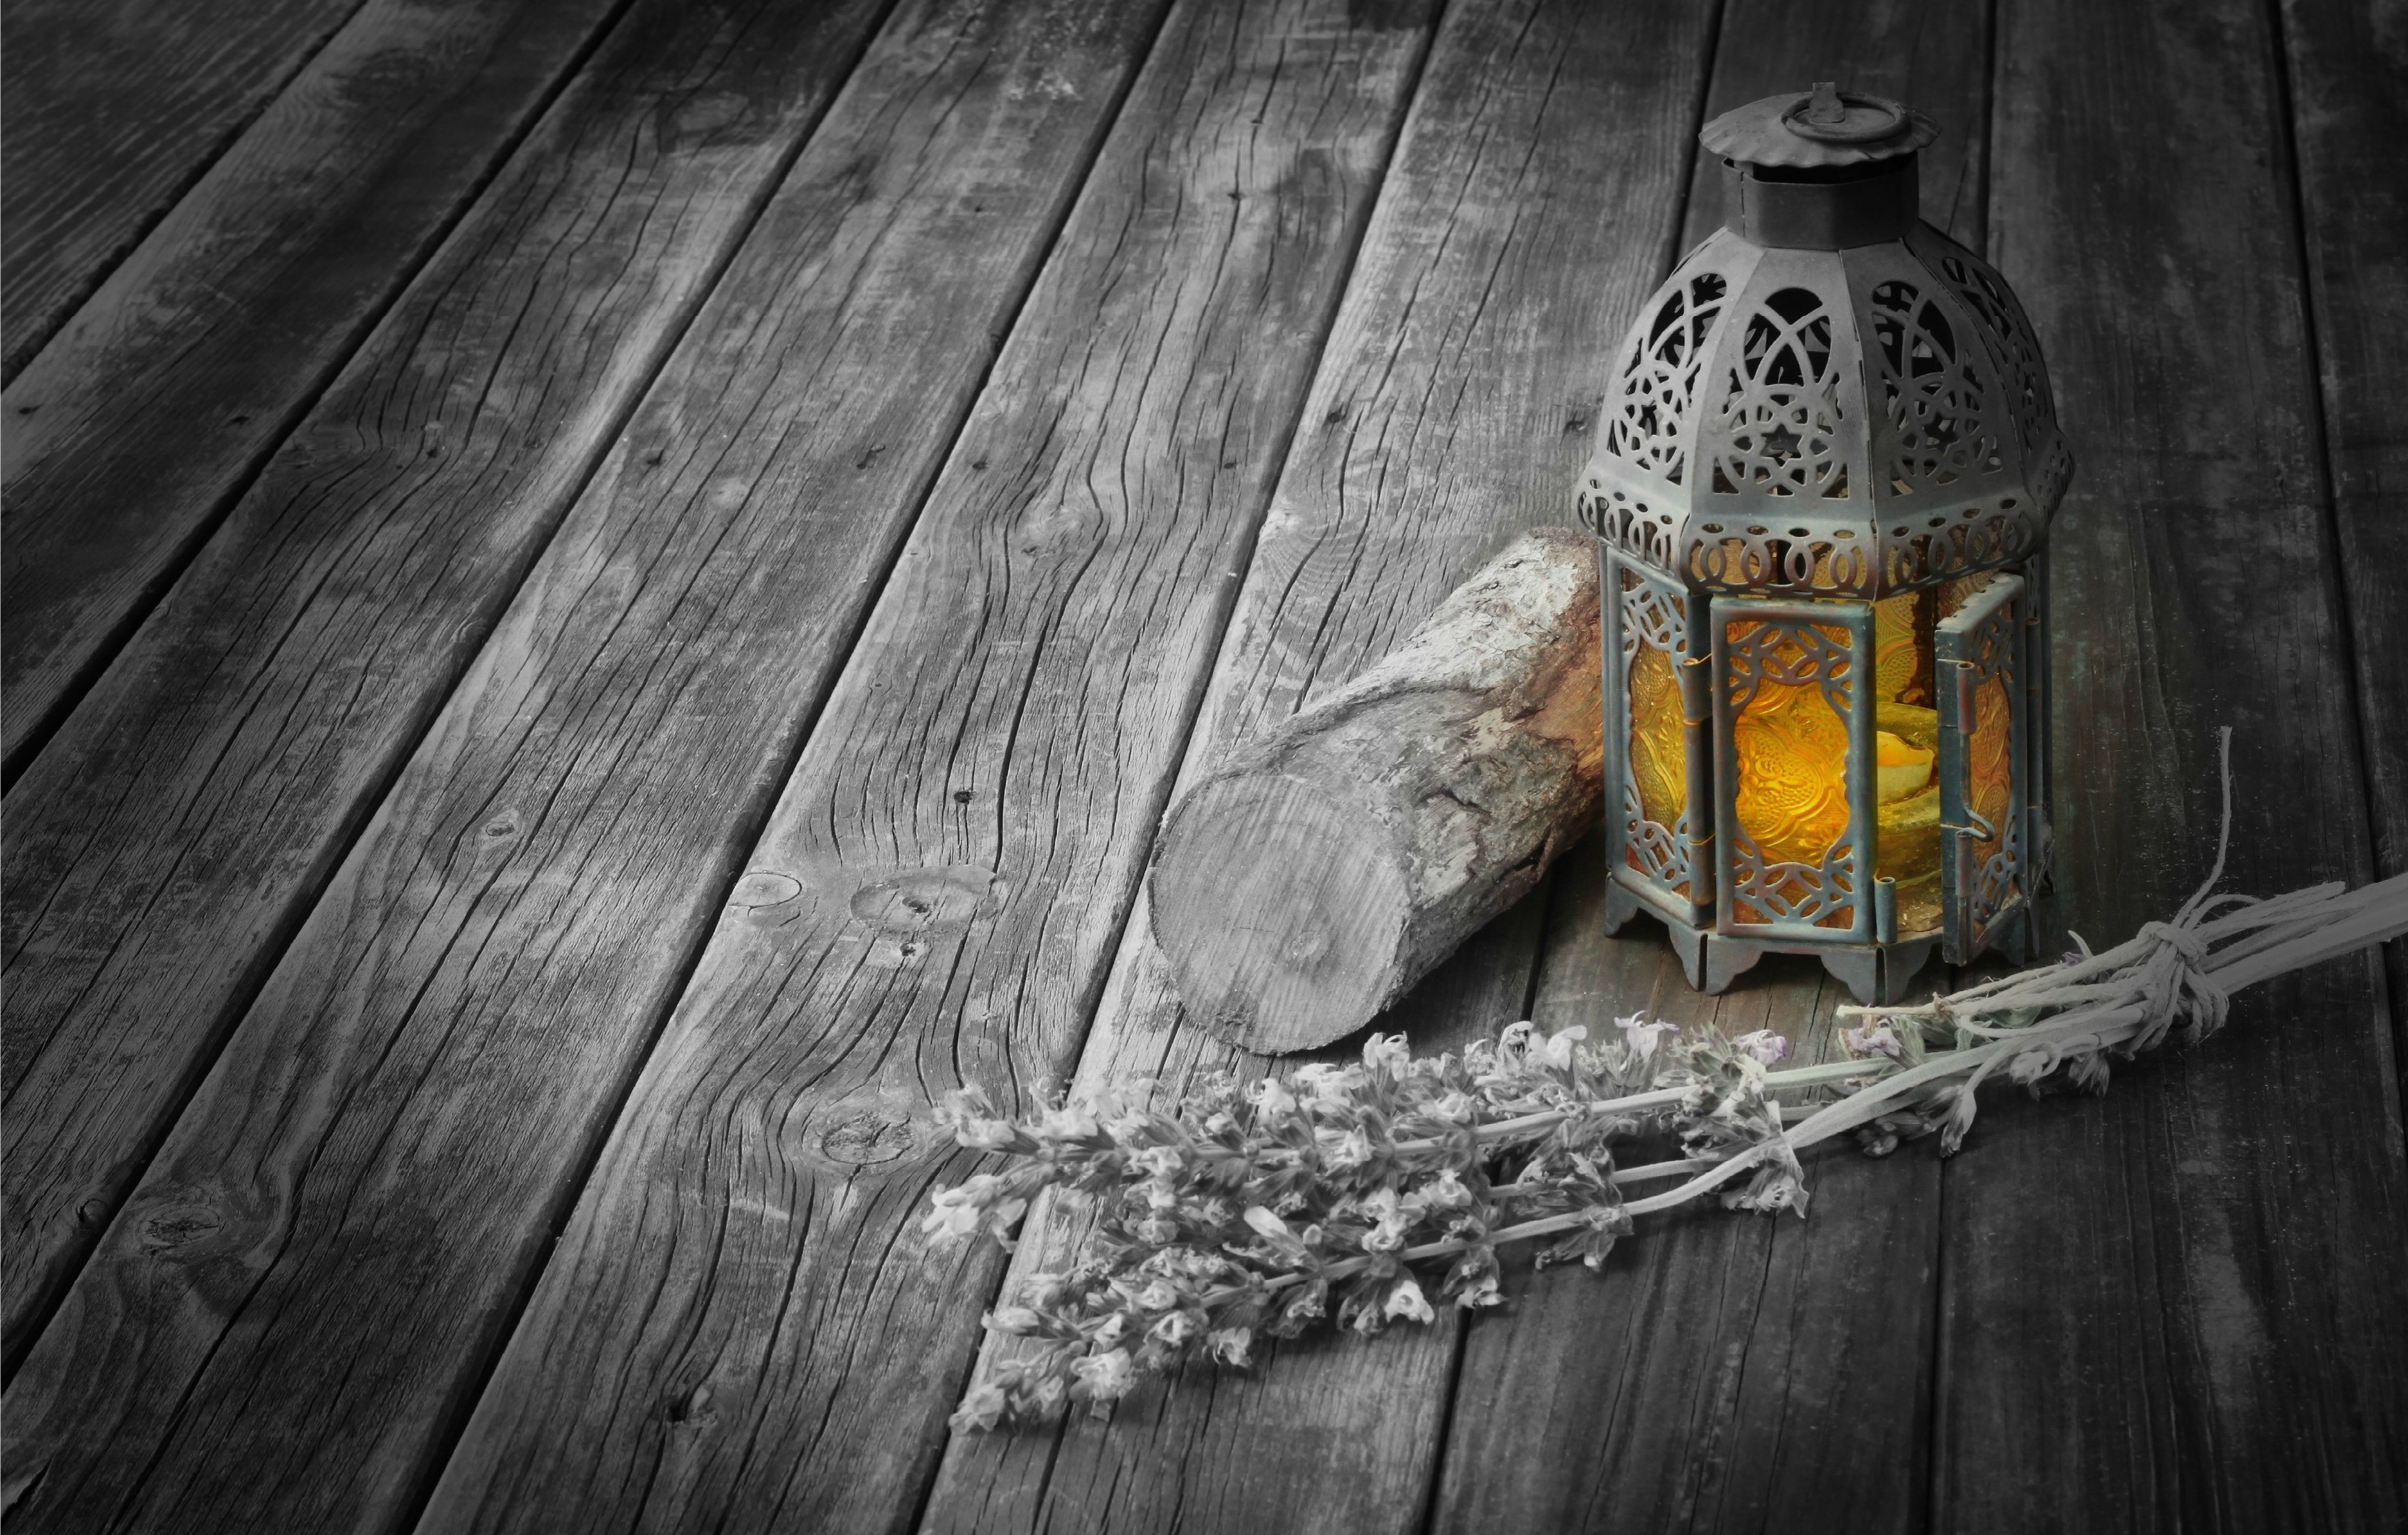 General 3246x2069 lantern selective coloring wood wooden surface